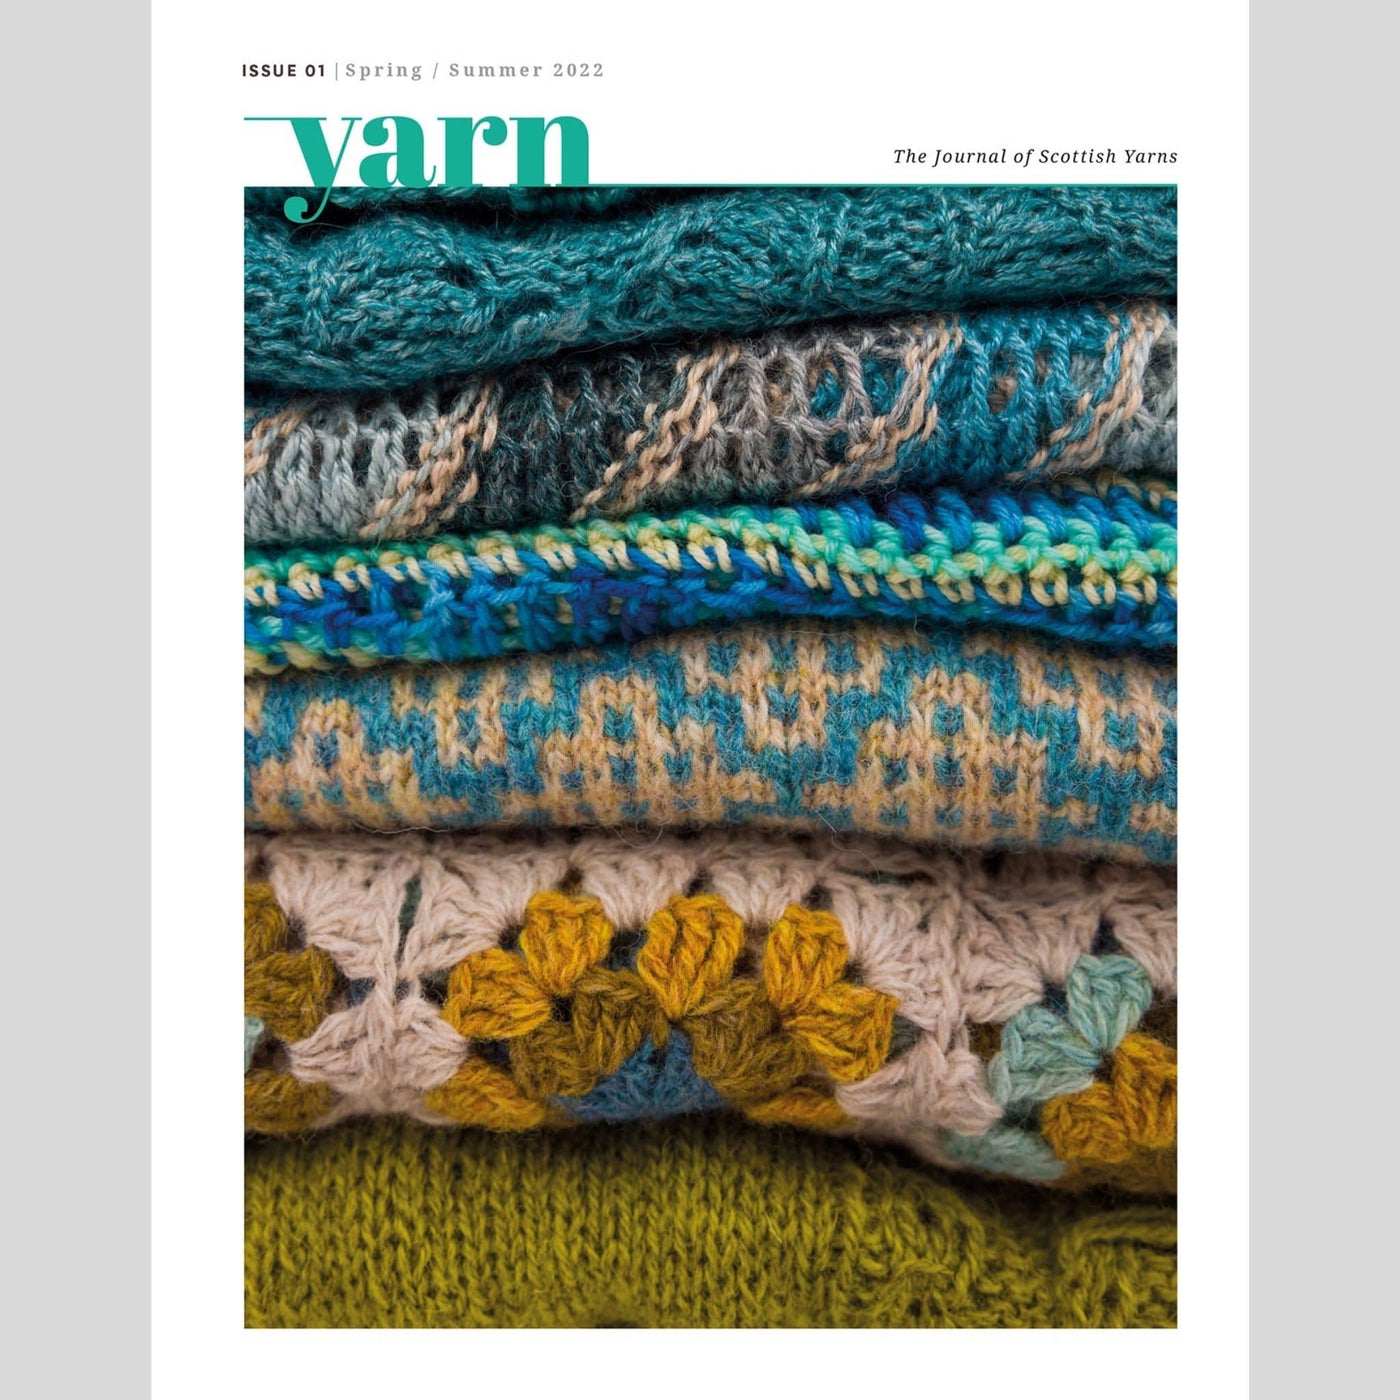 Cover of Yarn-The Journal of Scottish Yarns publication. Cover shows a folded pile of knit and crochet fabrics.